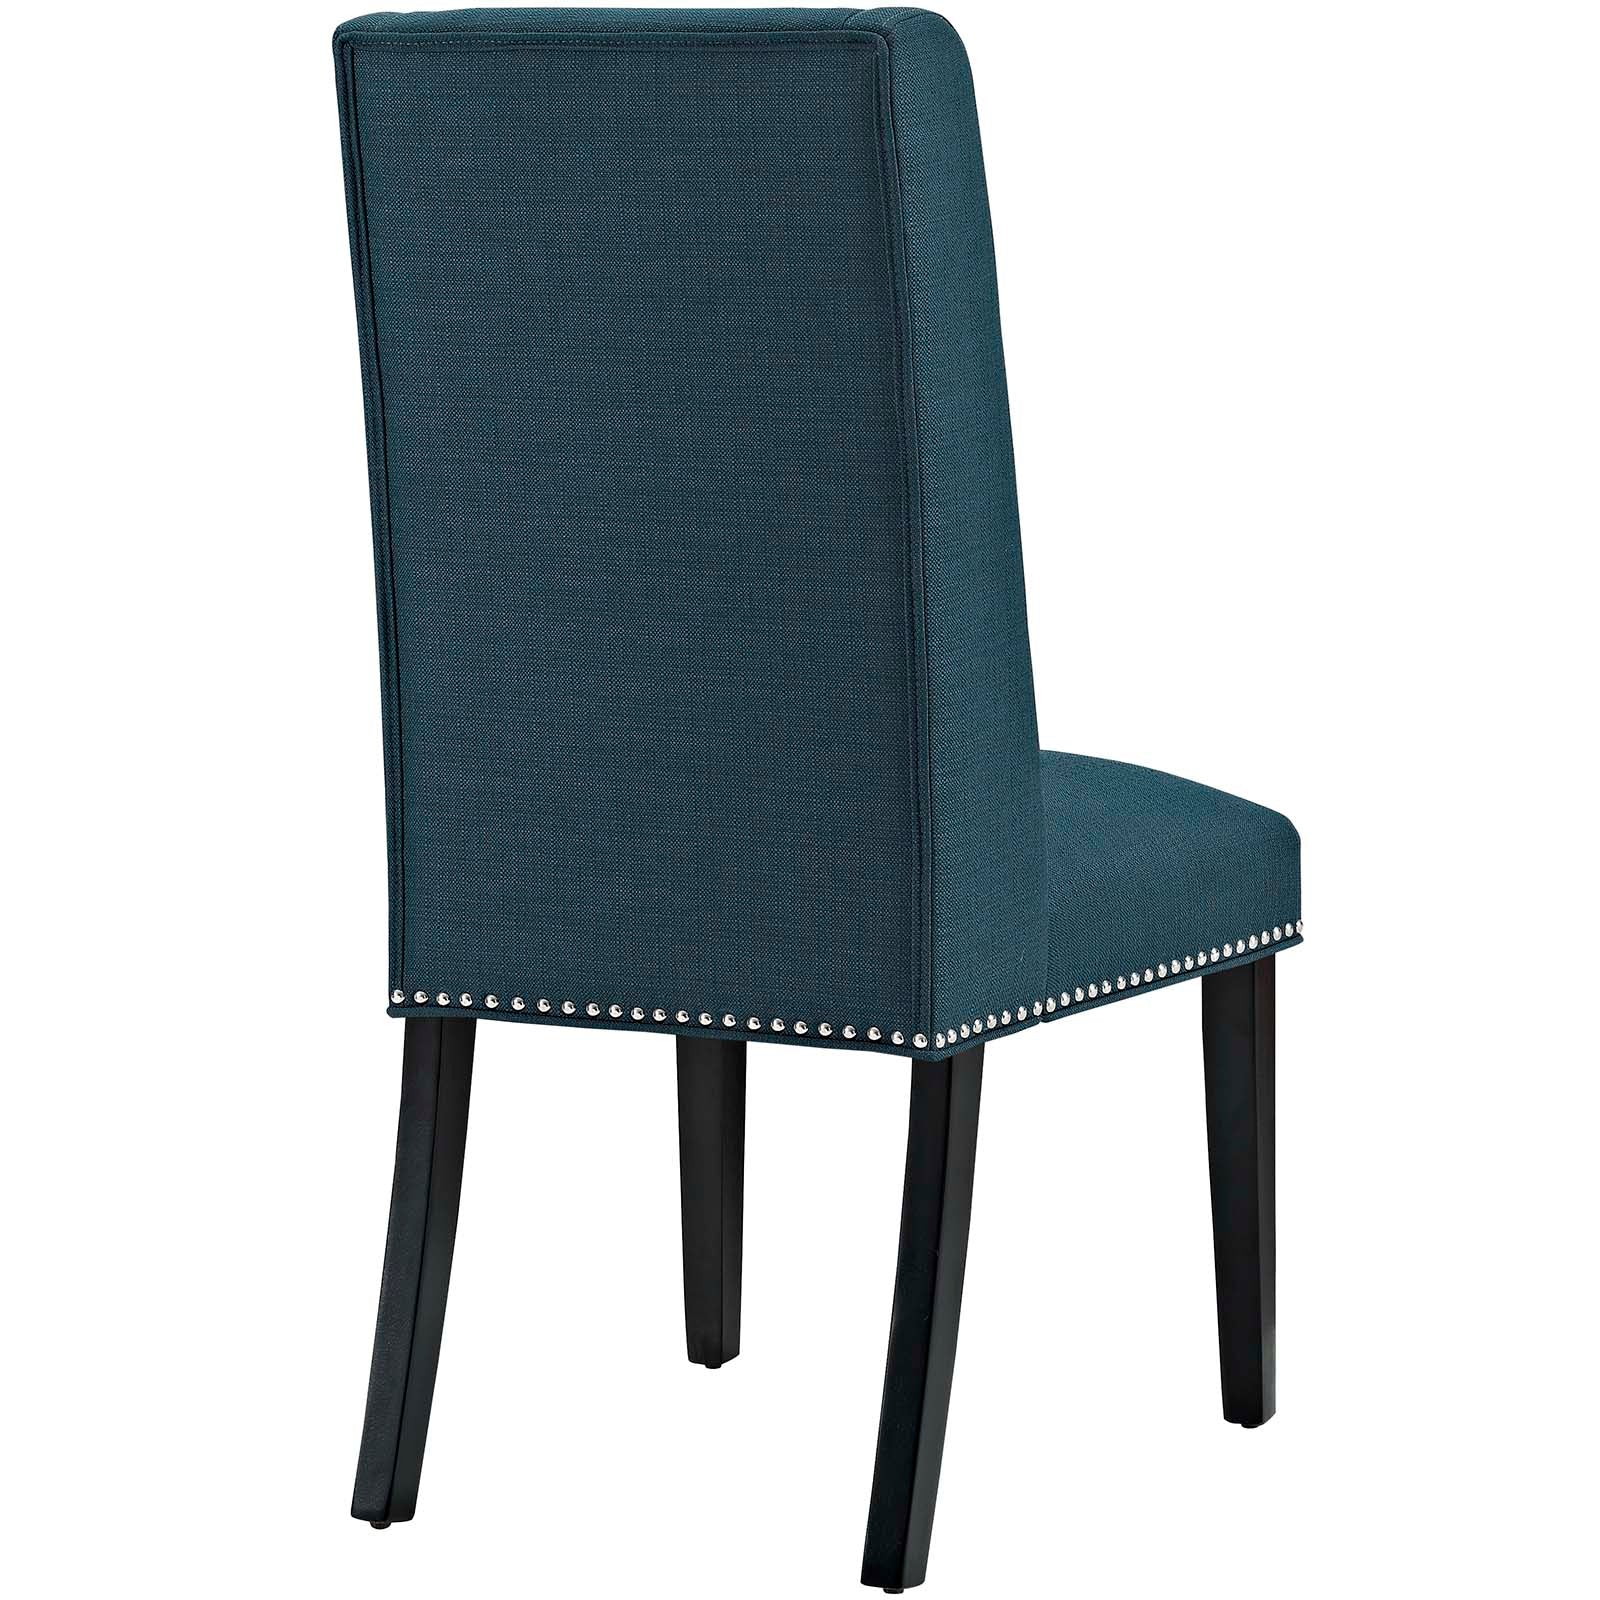 Baron Dining Chair Fabric Set of 4 - East Shore Modern Home Furnishings